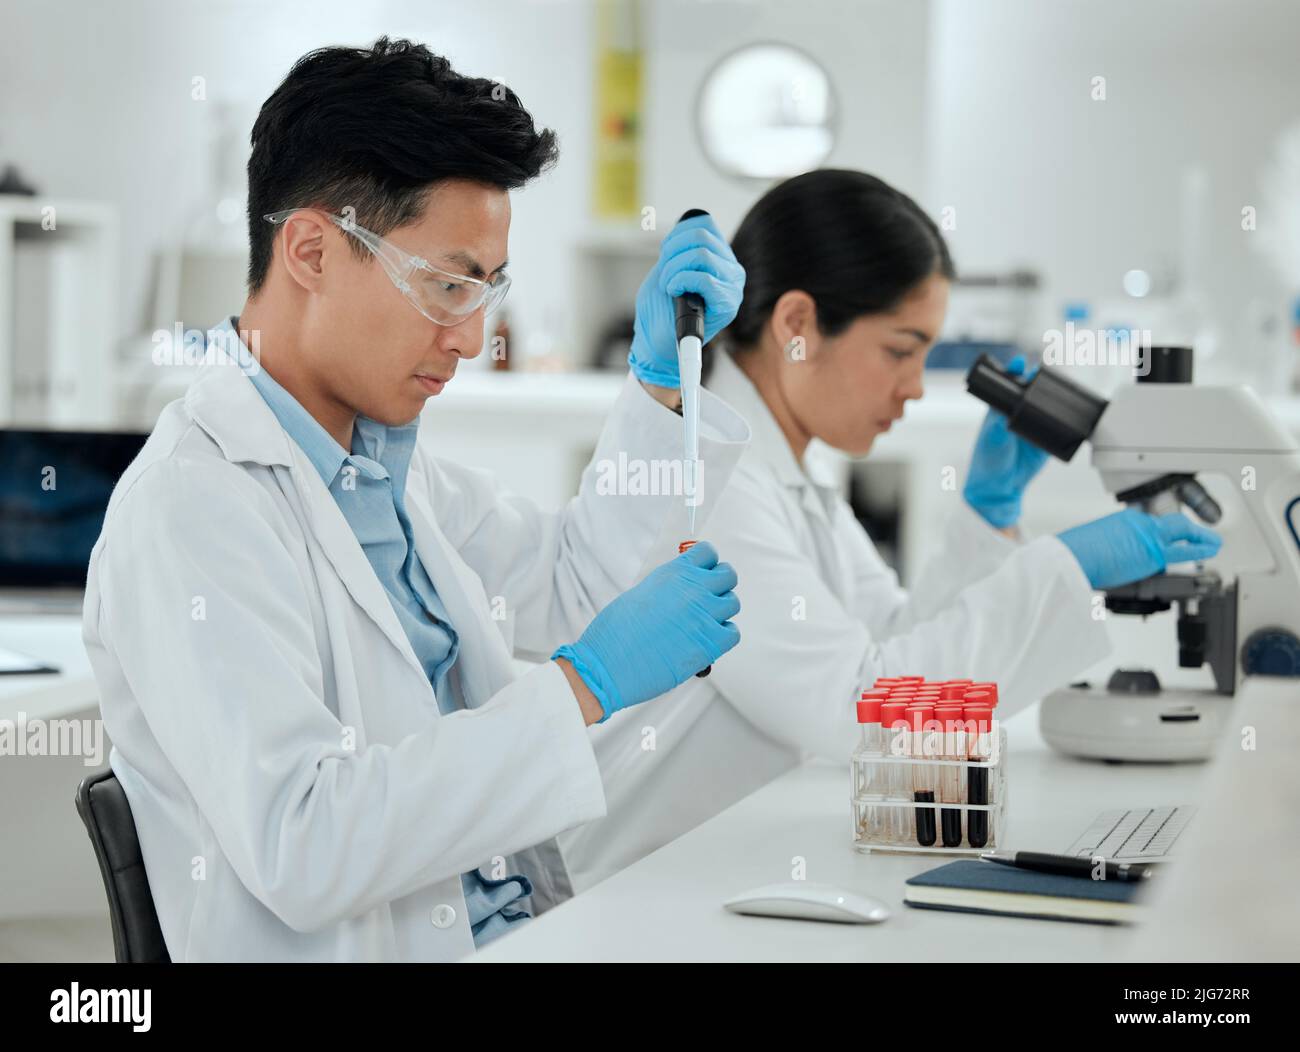 Time to send this off to the lab. Shot of a young man filling a test tube in a lab. Stock Photo